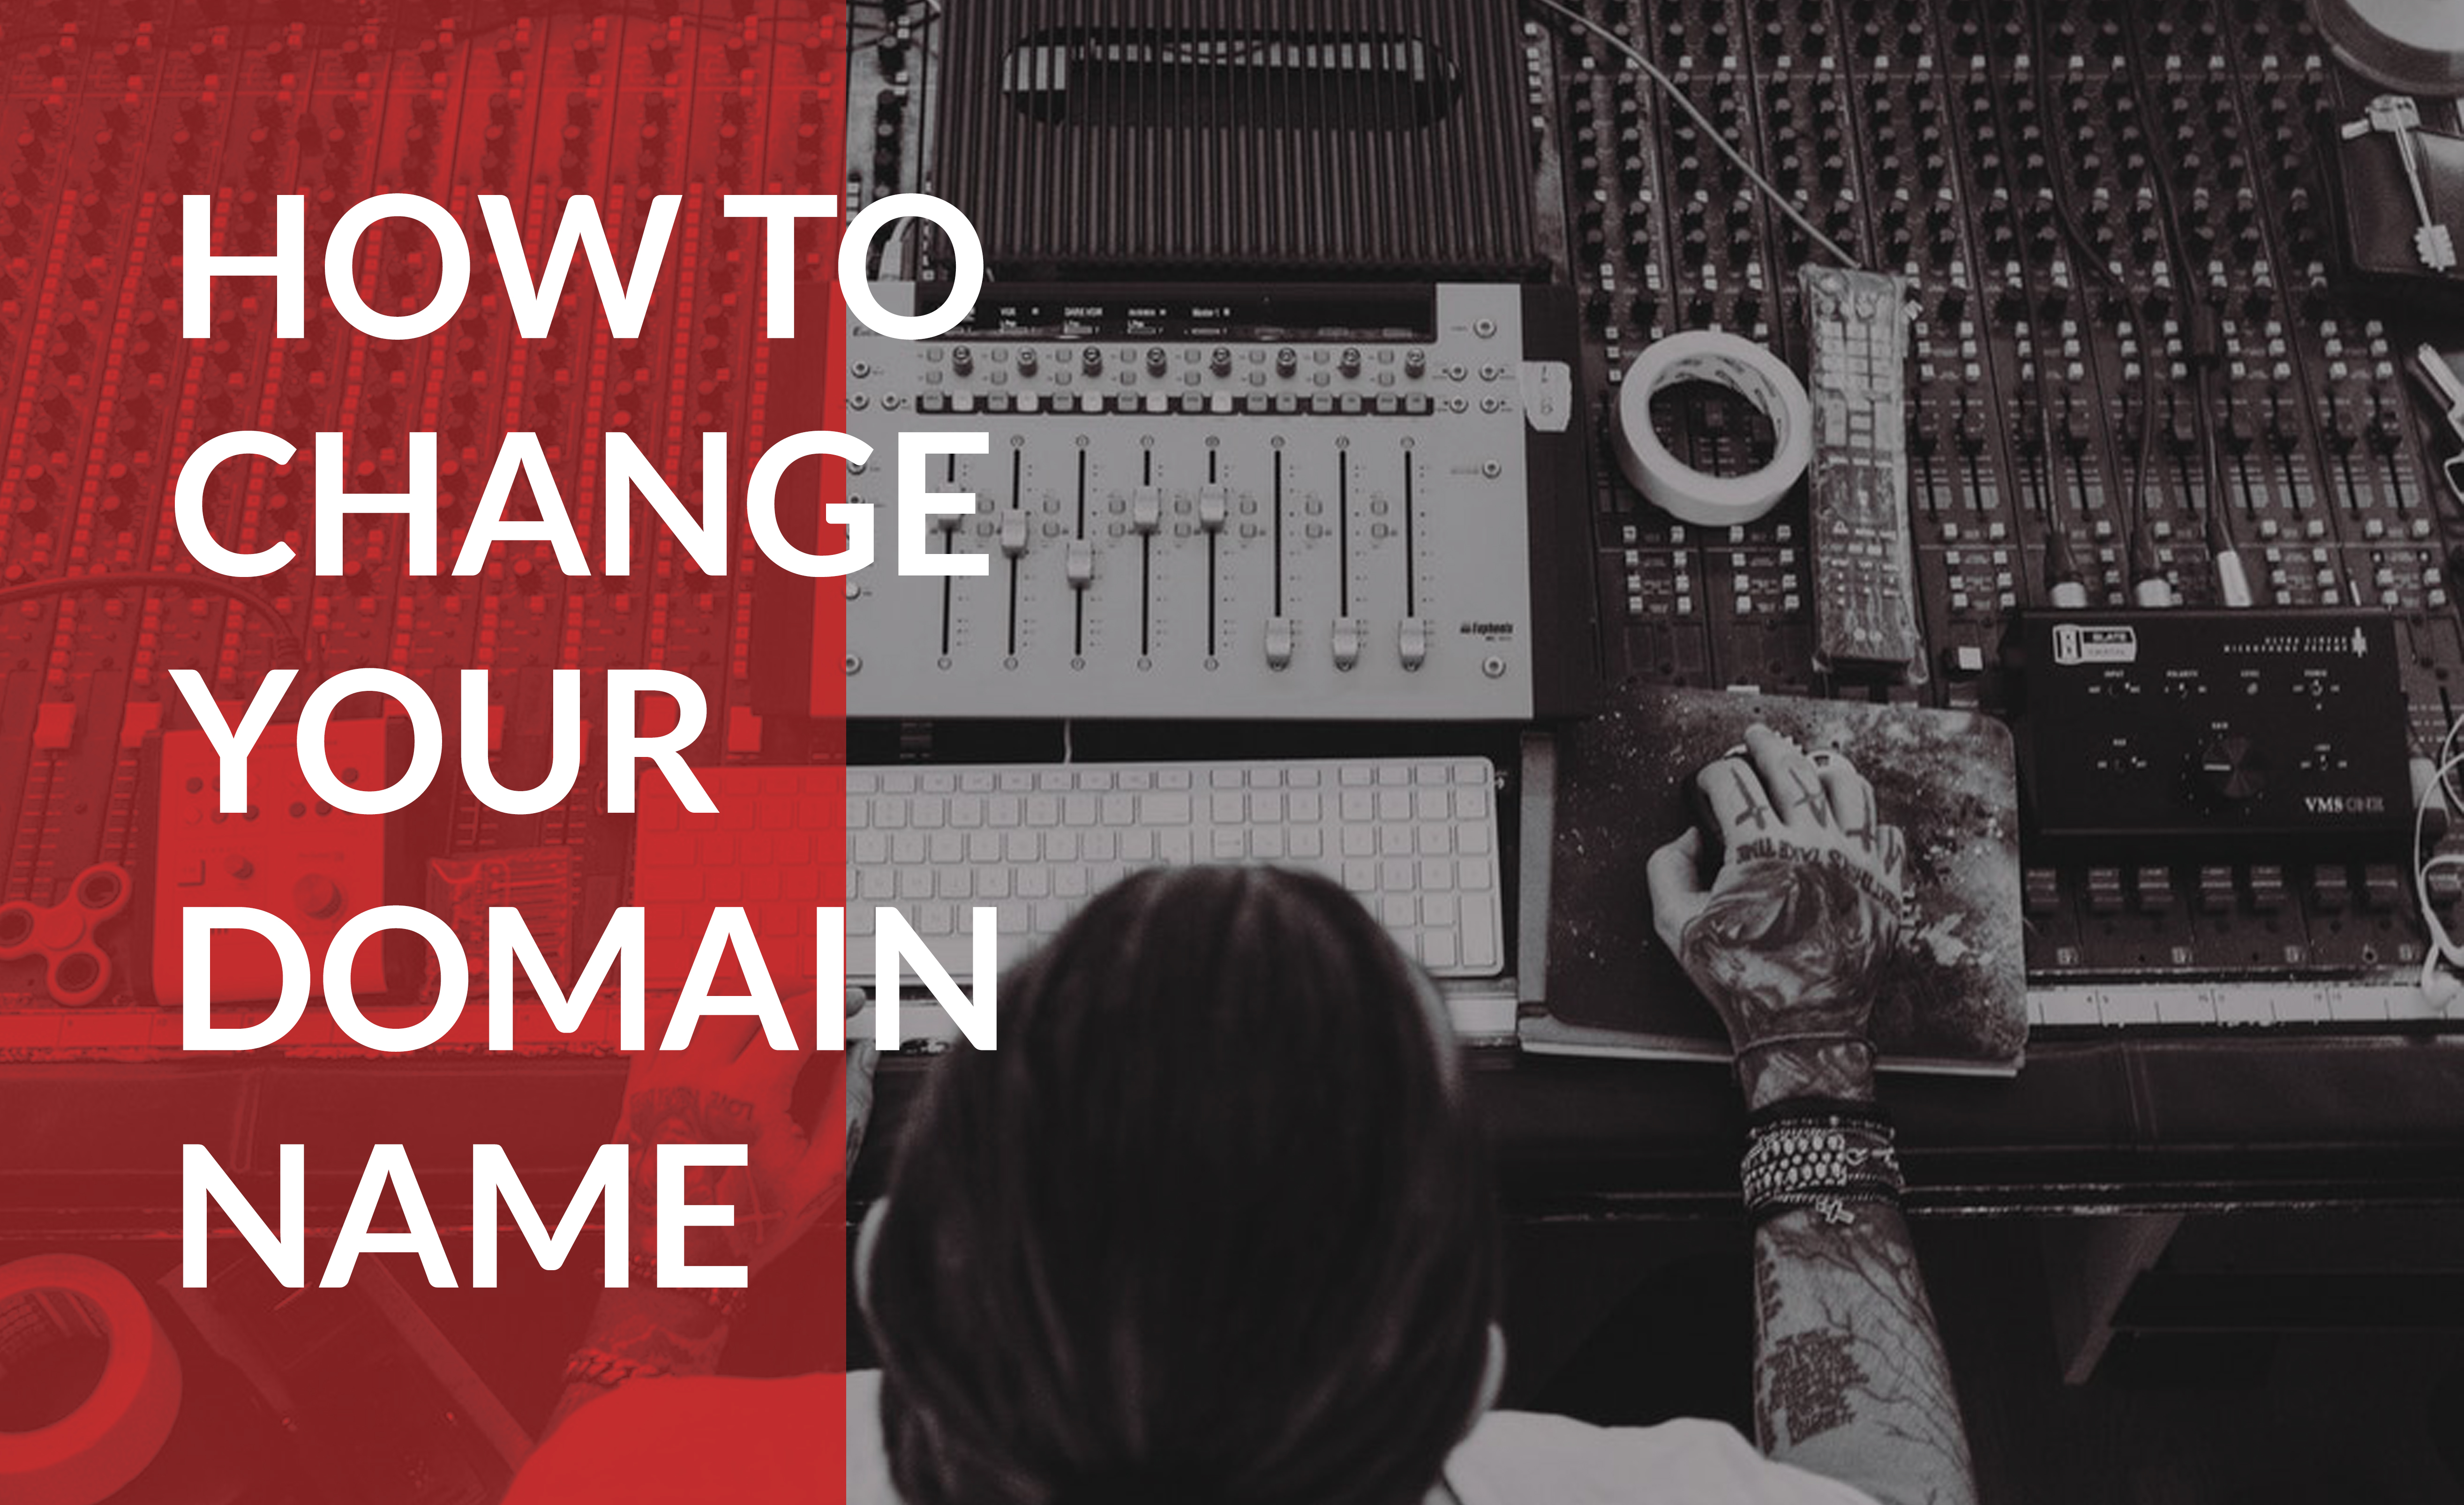 Learn the steps to change your domain name into something that grows your business.